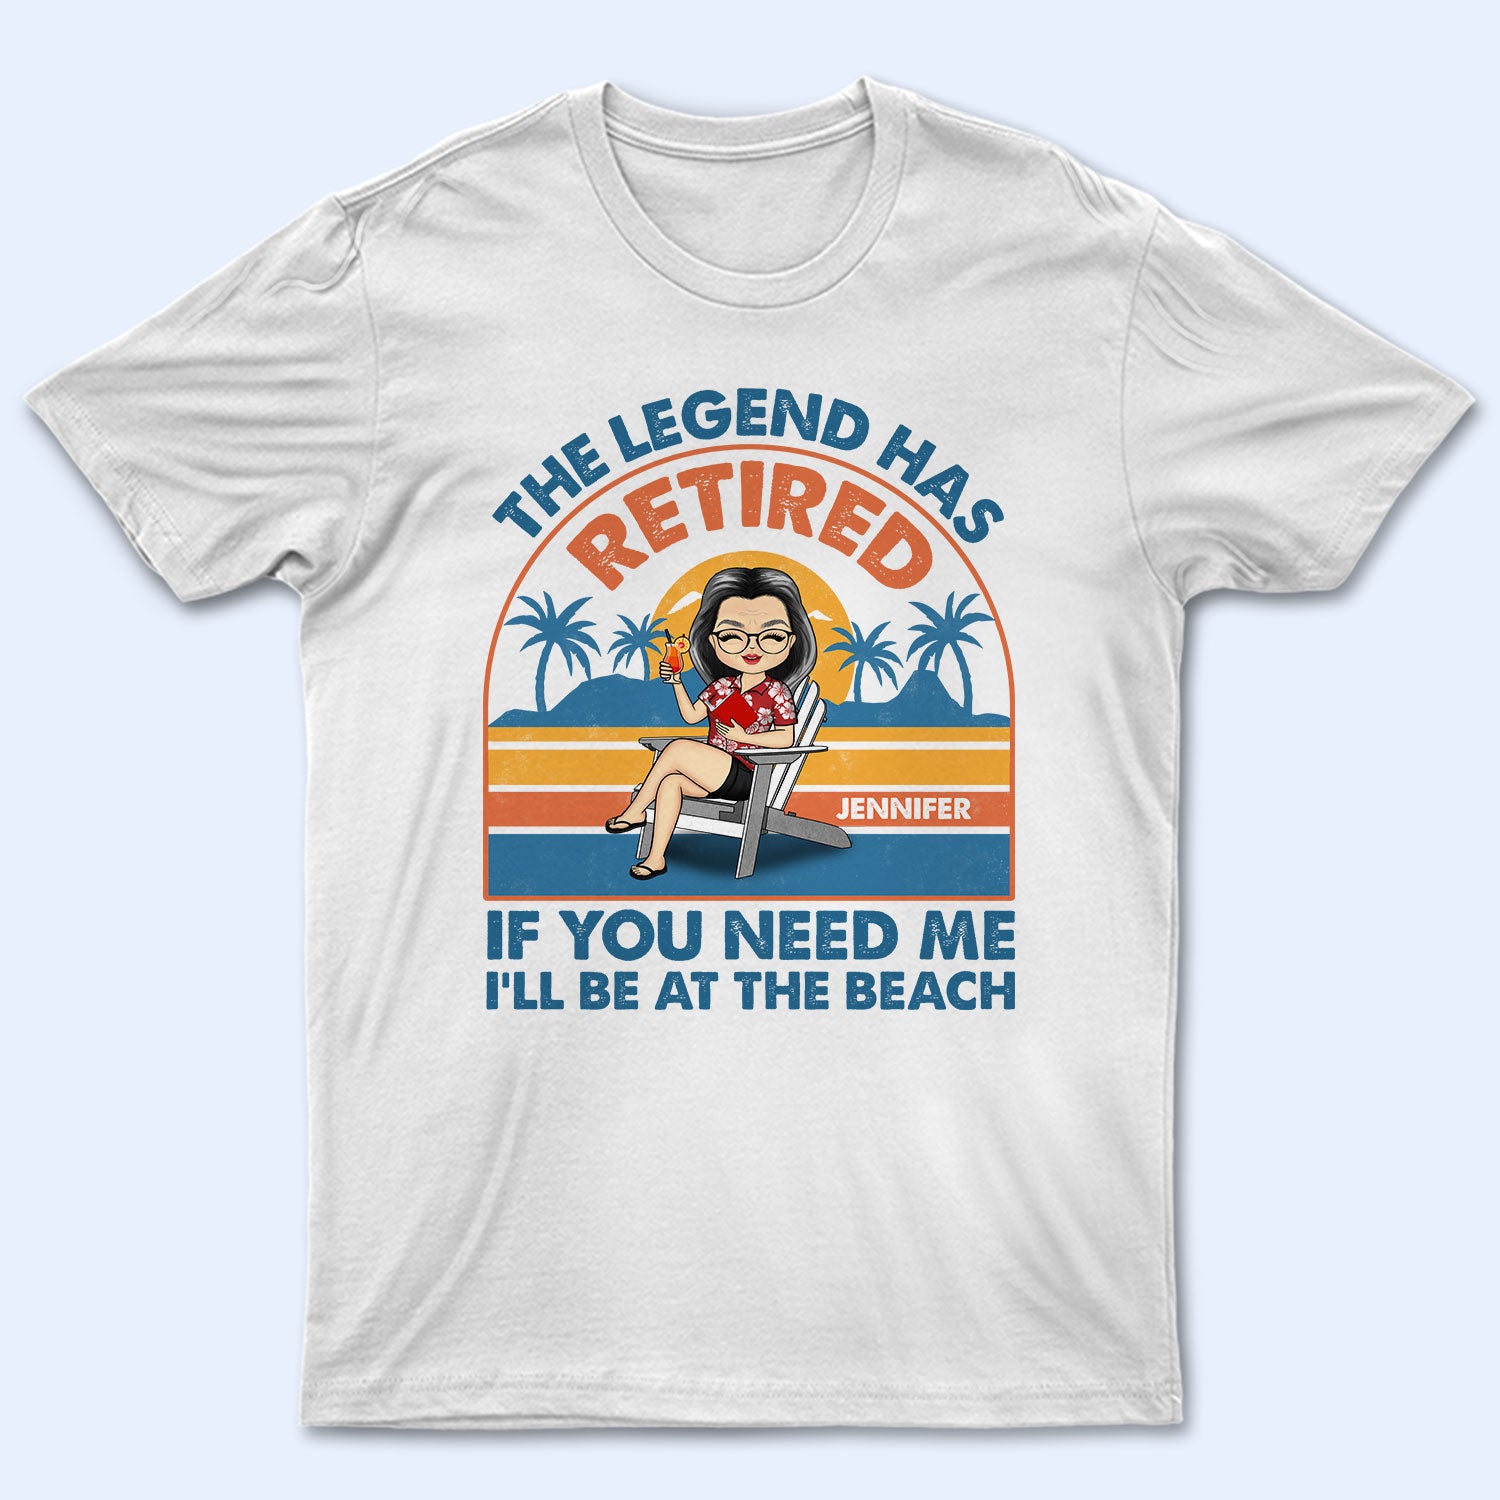 If You Need Me I'll Be At The Beach - Retirement Gift - Personalized Custom T Shirt